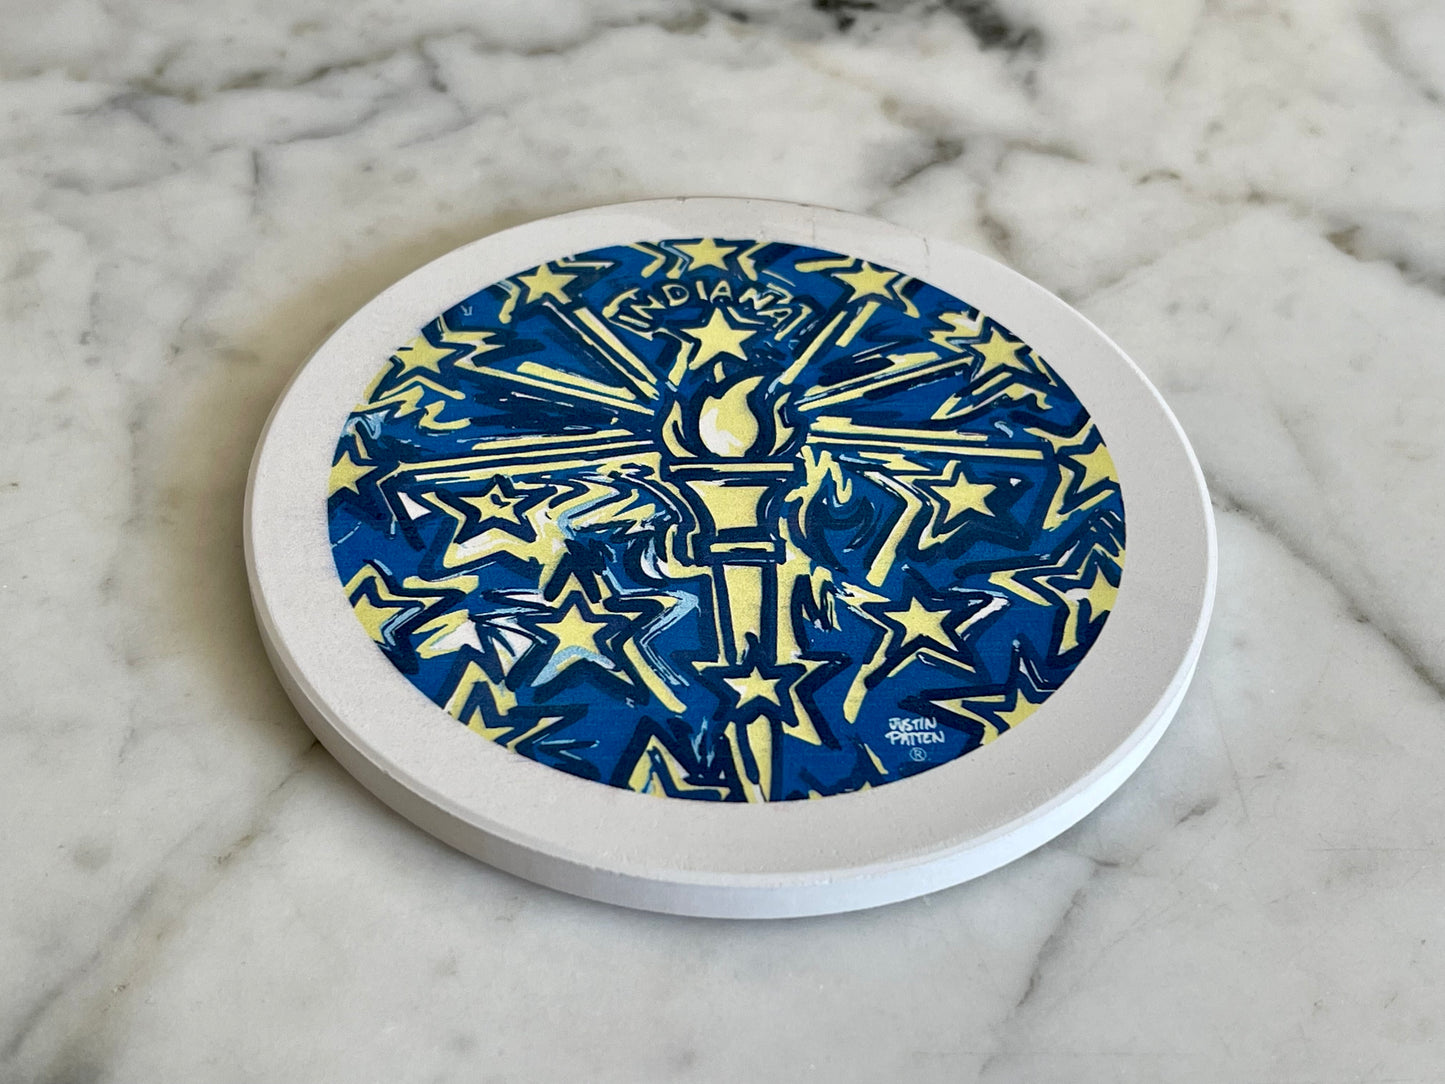 Indiana Flag Stone Coaster by Justin Patten